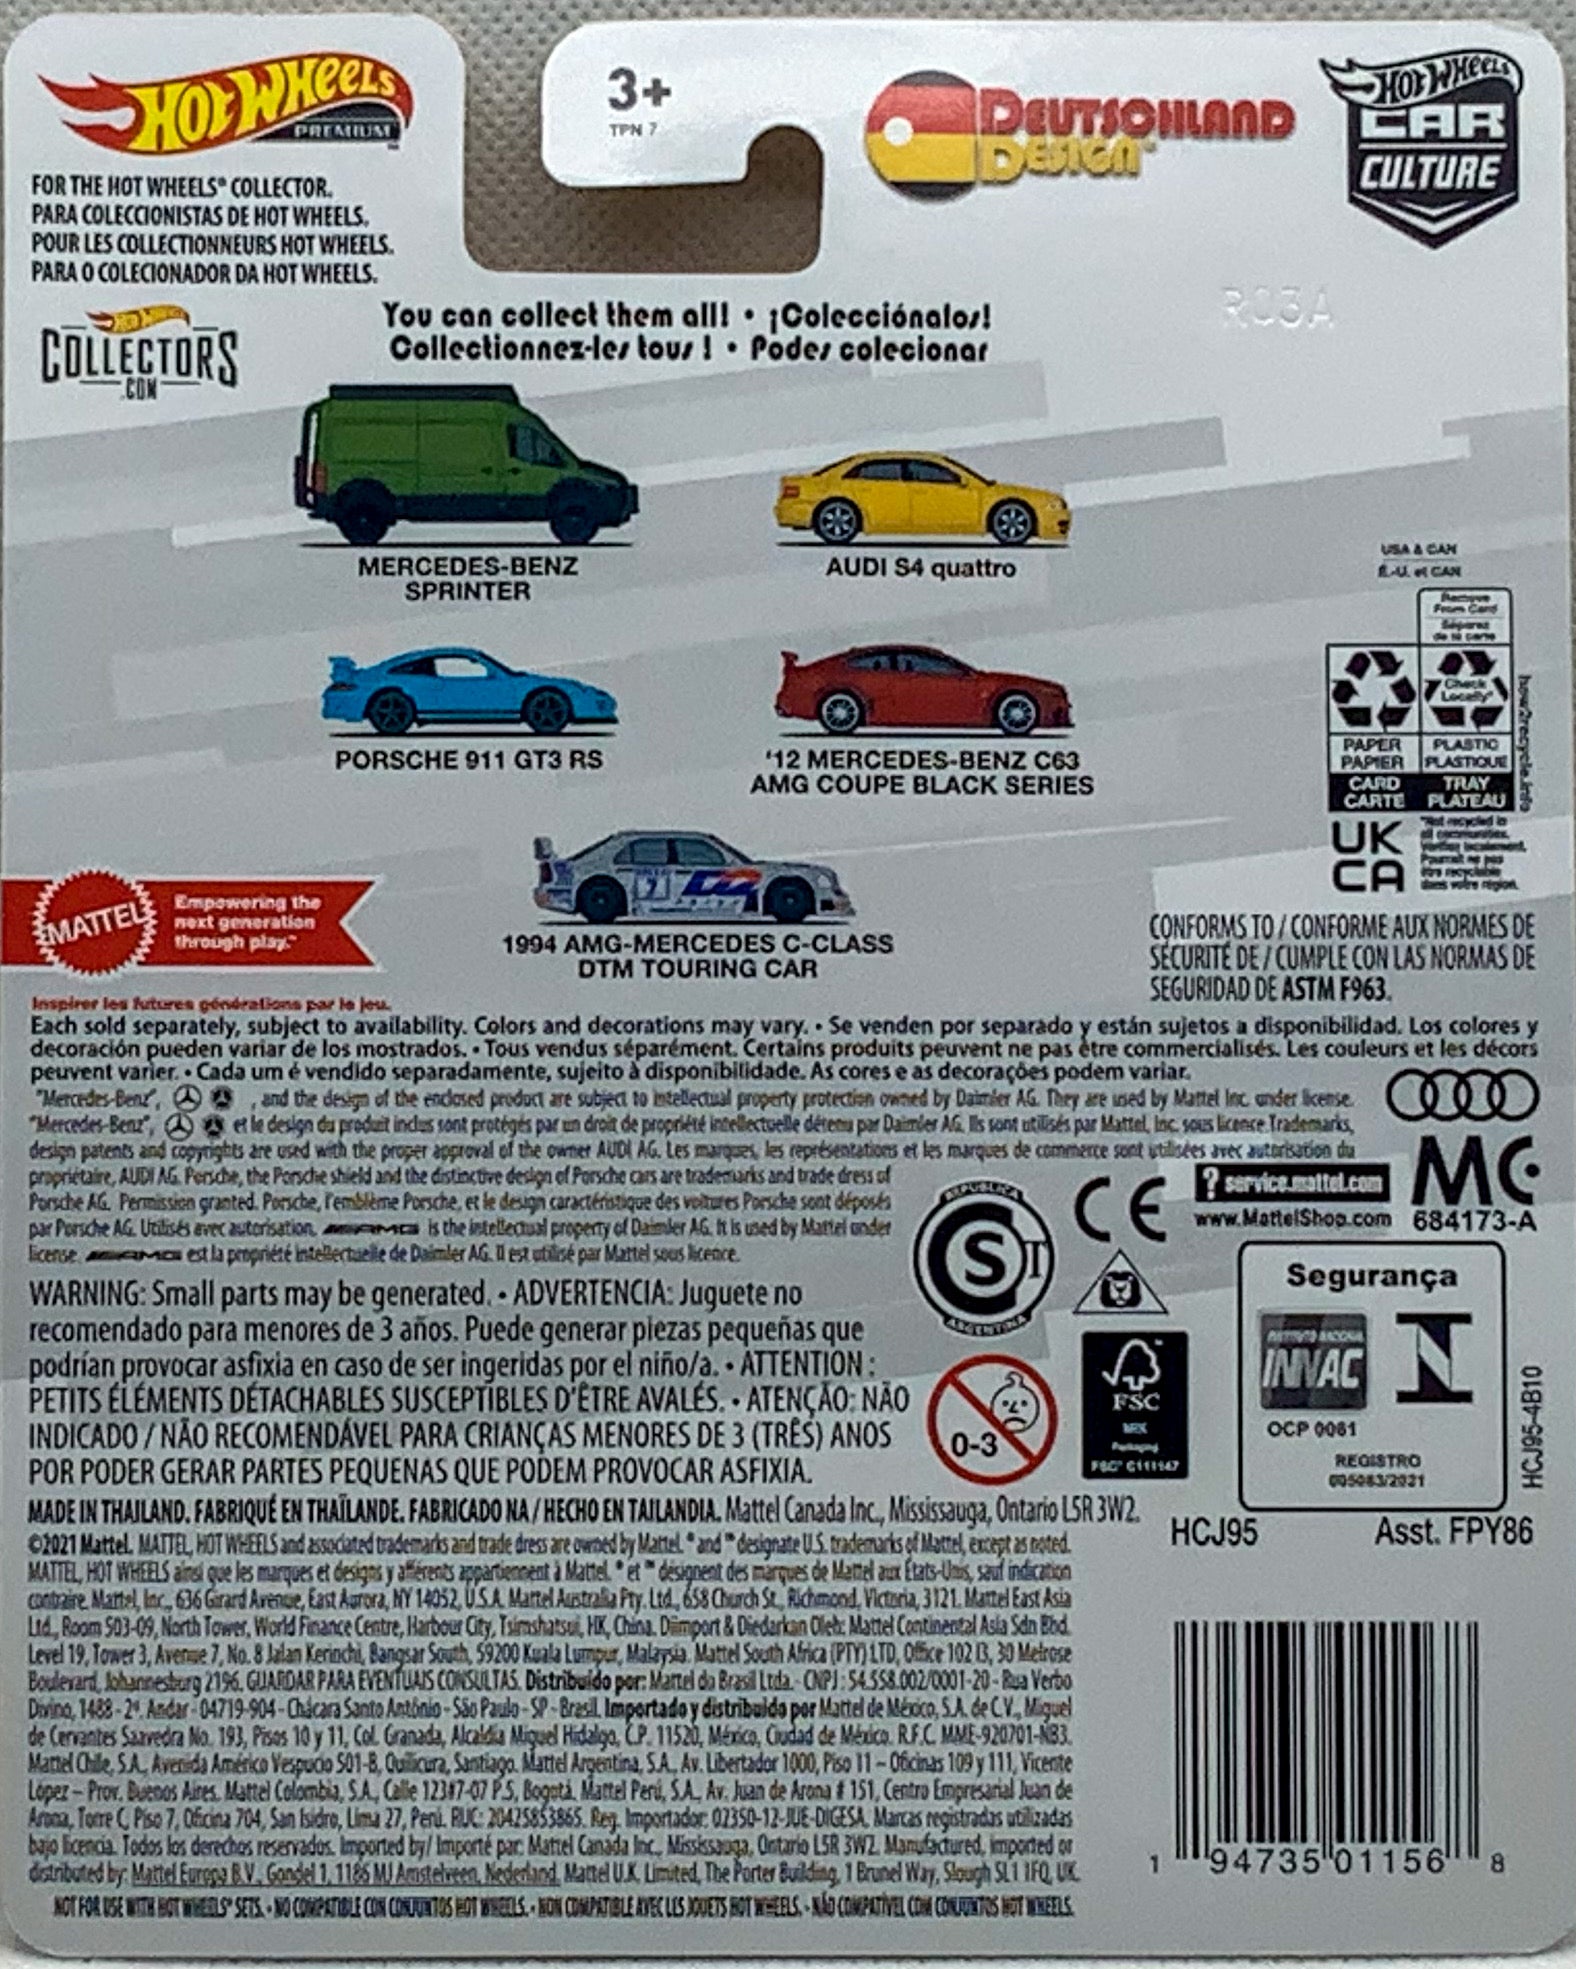 Buy at Tatoy Shop Back of Card shows the 5 Cars on Series Mercedes-Benz, Audi, Porsche, AMG Mercedes Premium Collections